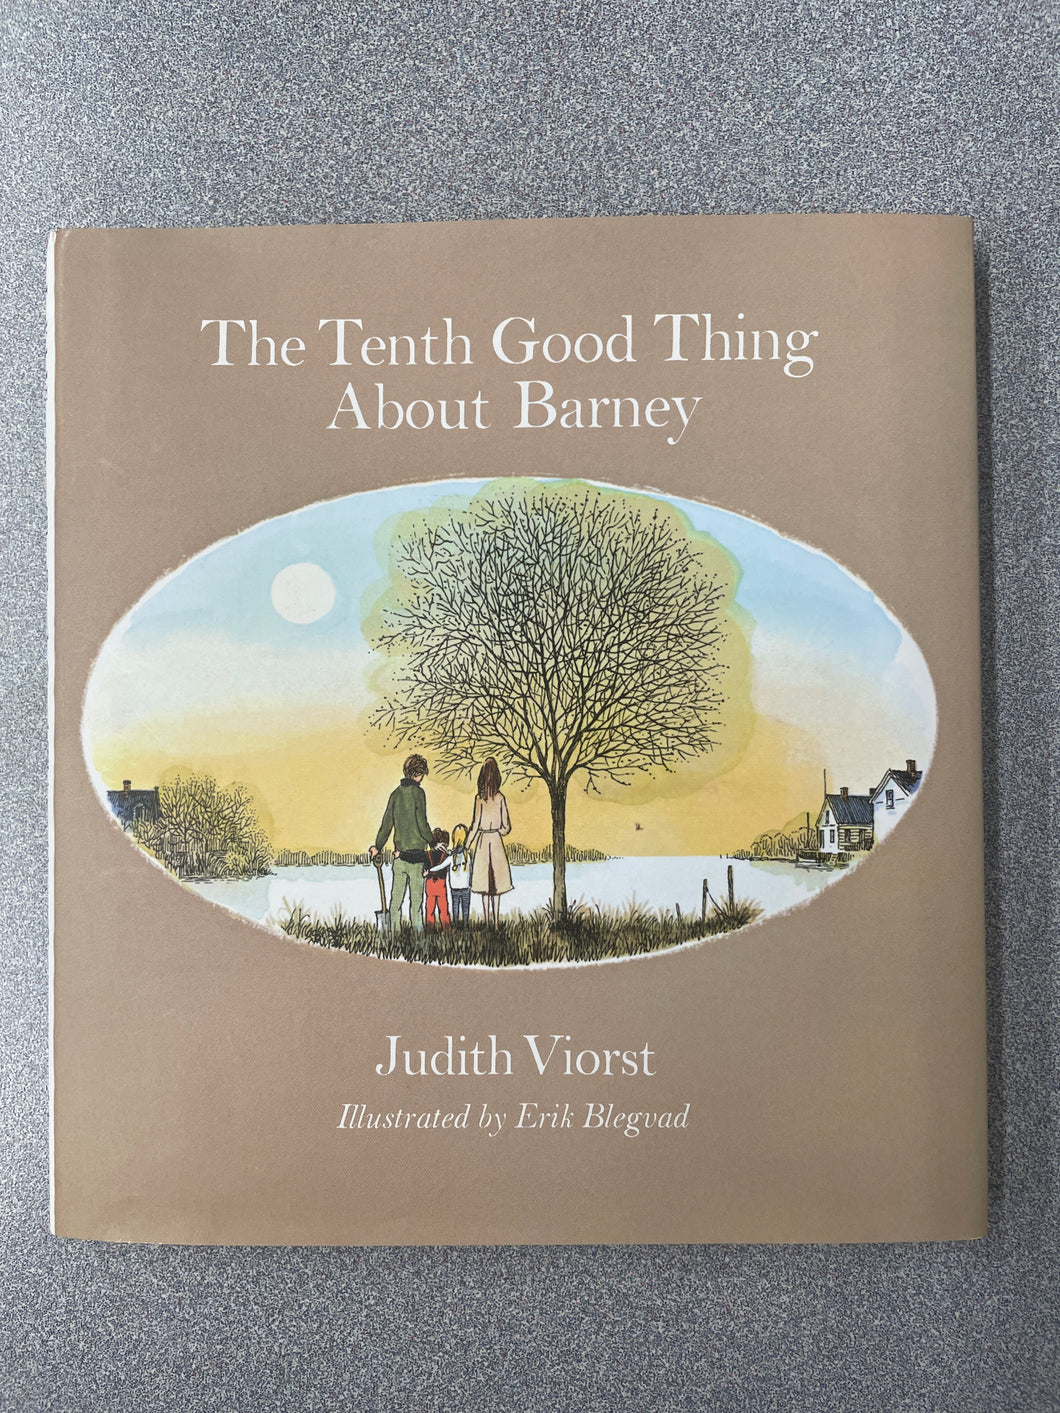 Viorst, Judith, The Tenth Good Thing About Barney [1971] CP 4/24